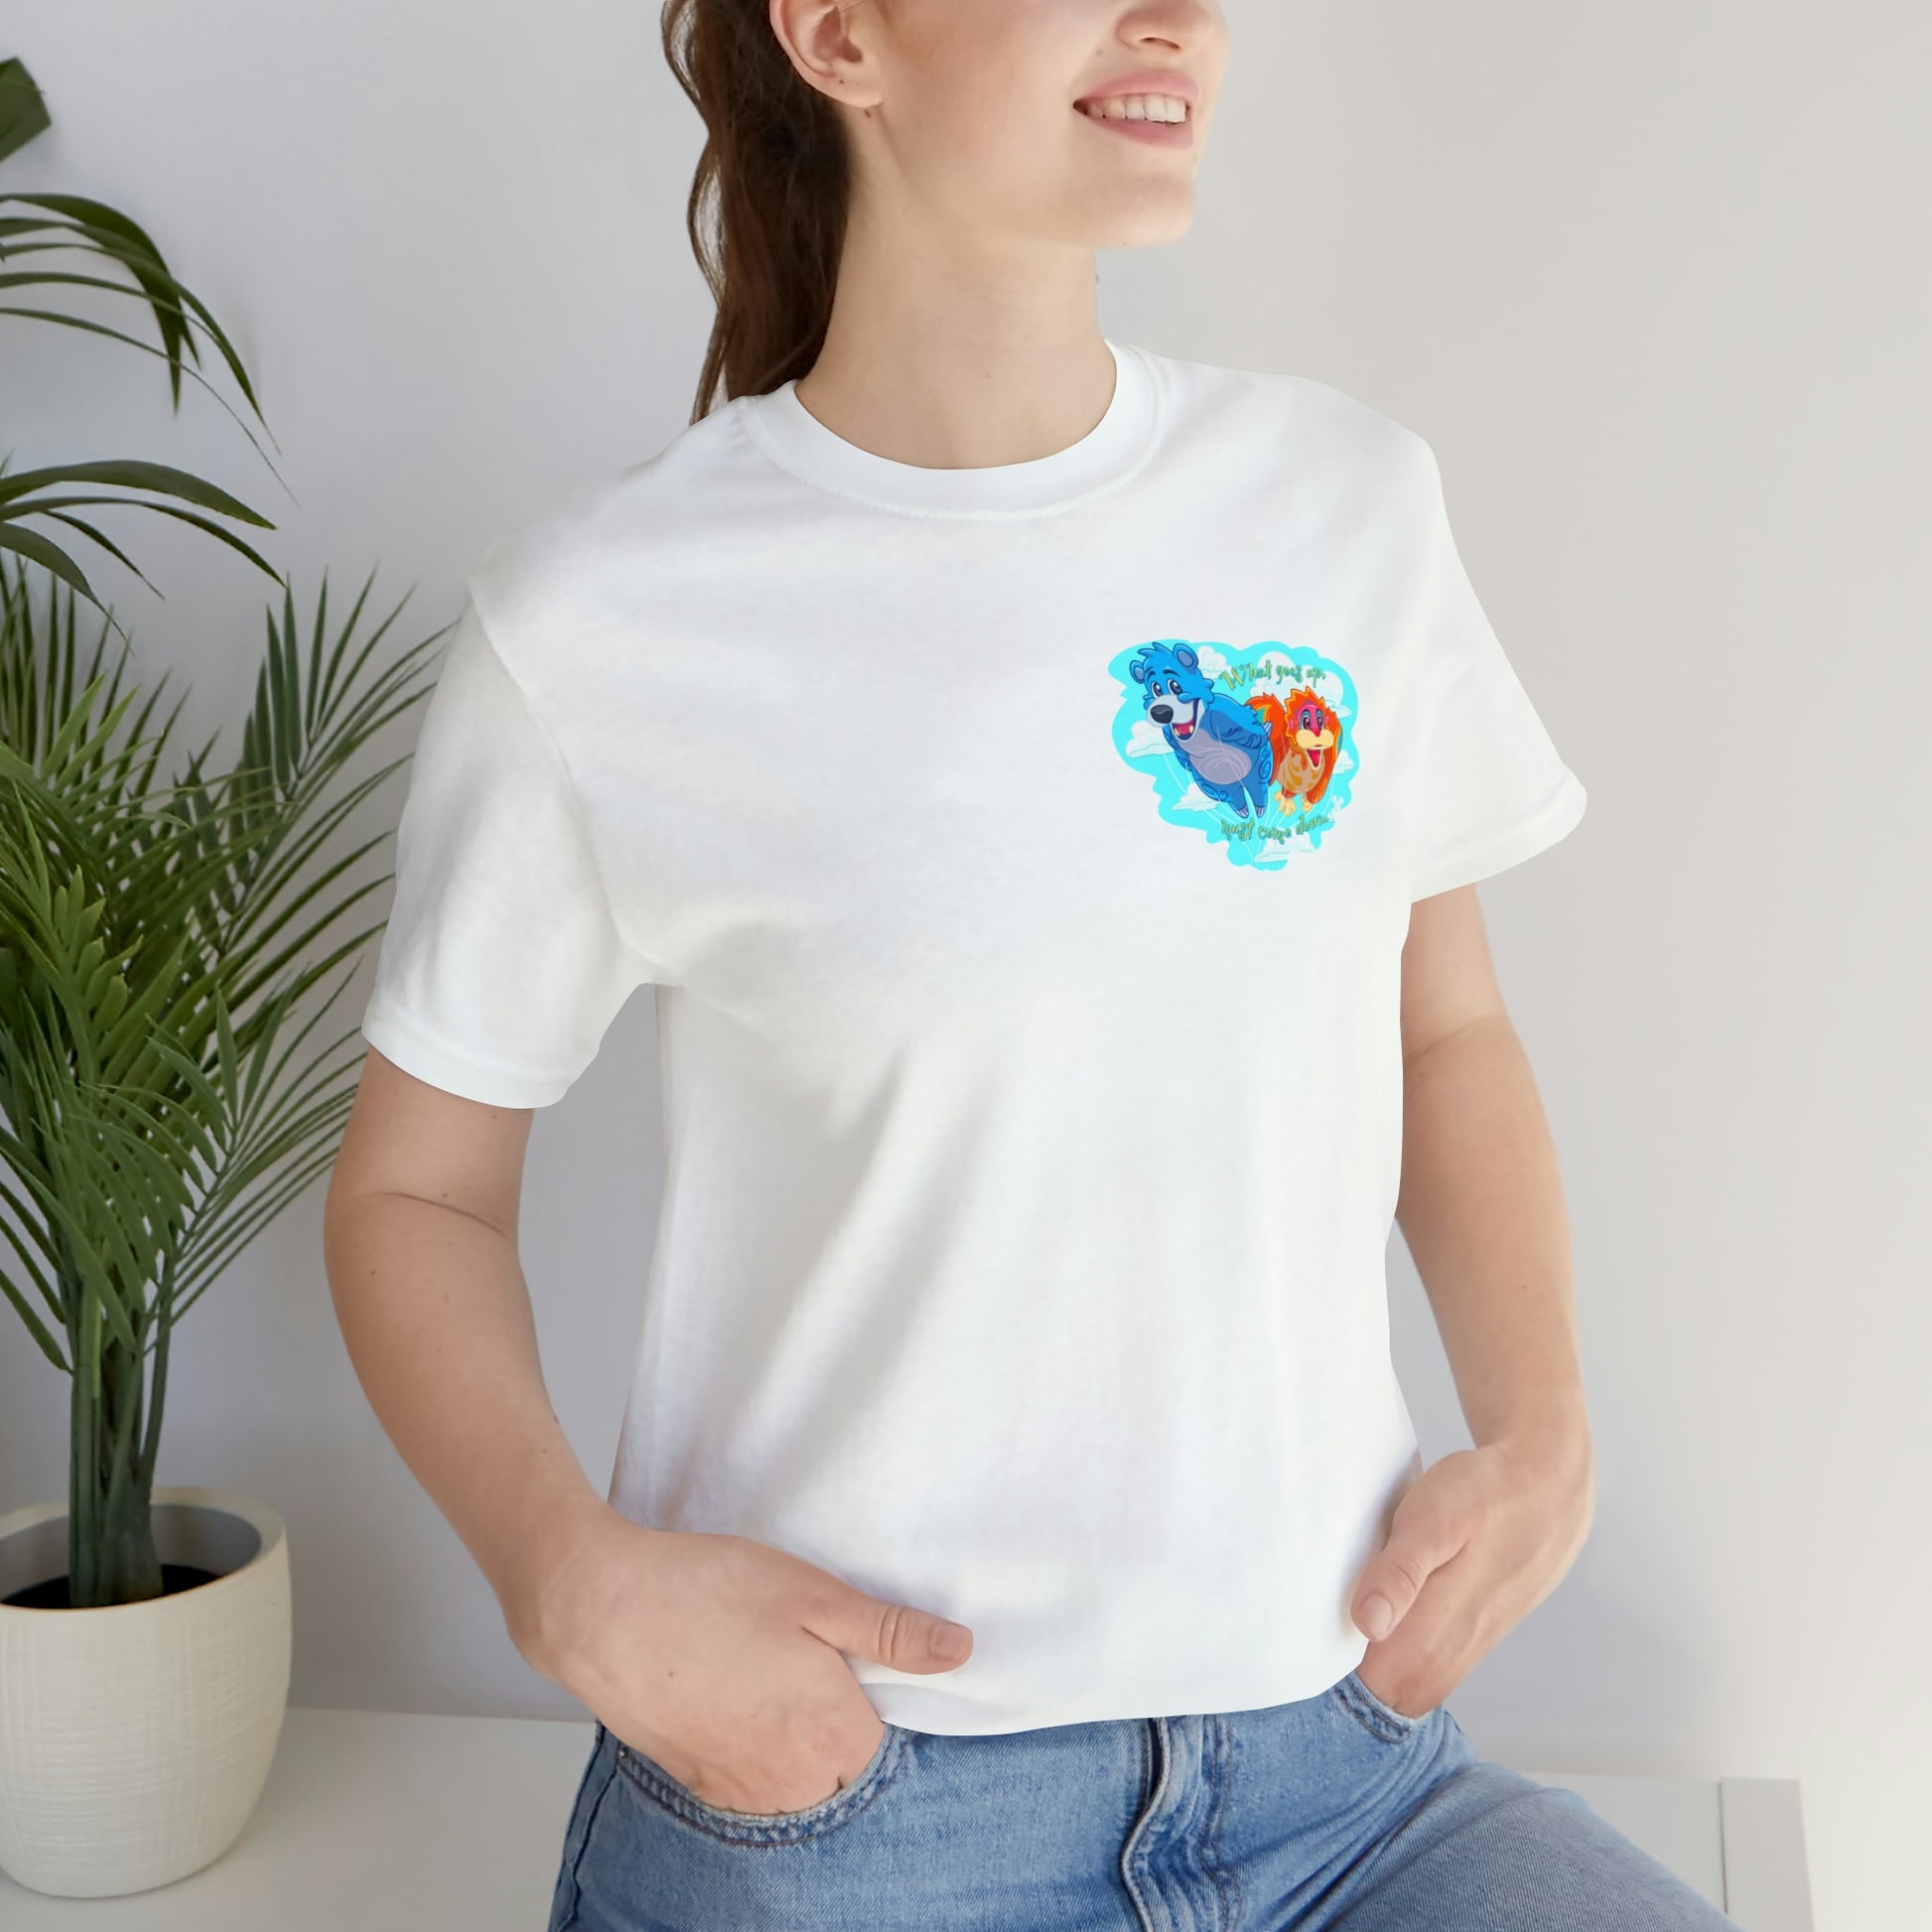 Jungle book kite tails shirt in white